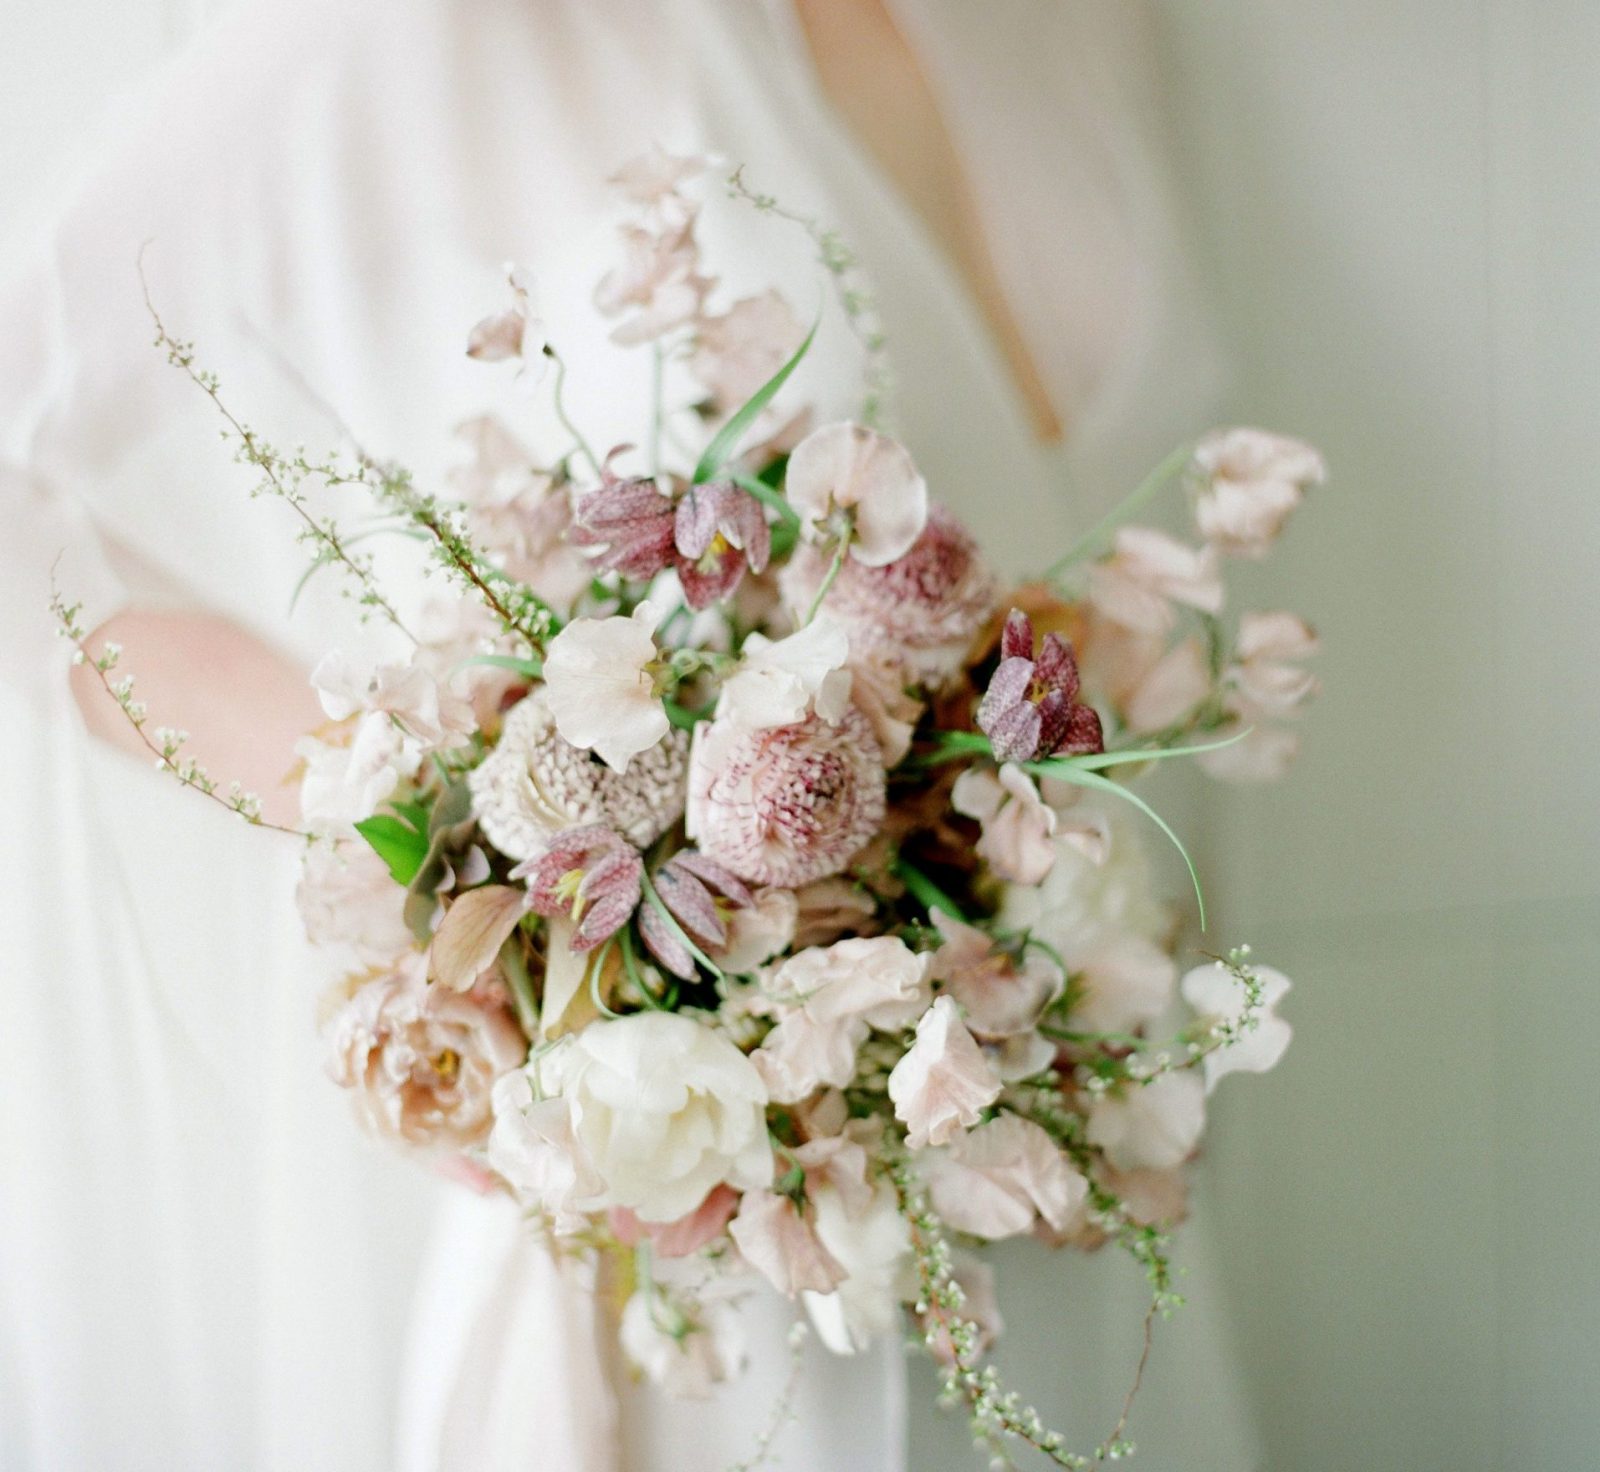 Bridal Bouquet Inspiration for Spring: 12 of the Prettiest Bouquets We've Seen This Spring in Alberta and the Rockies